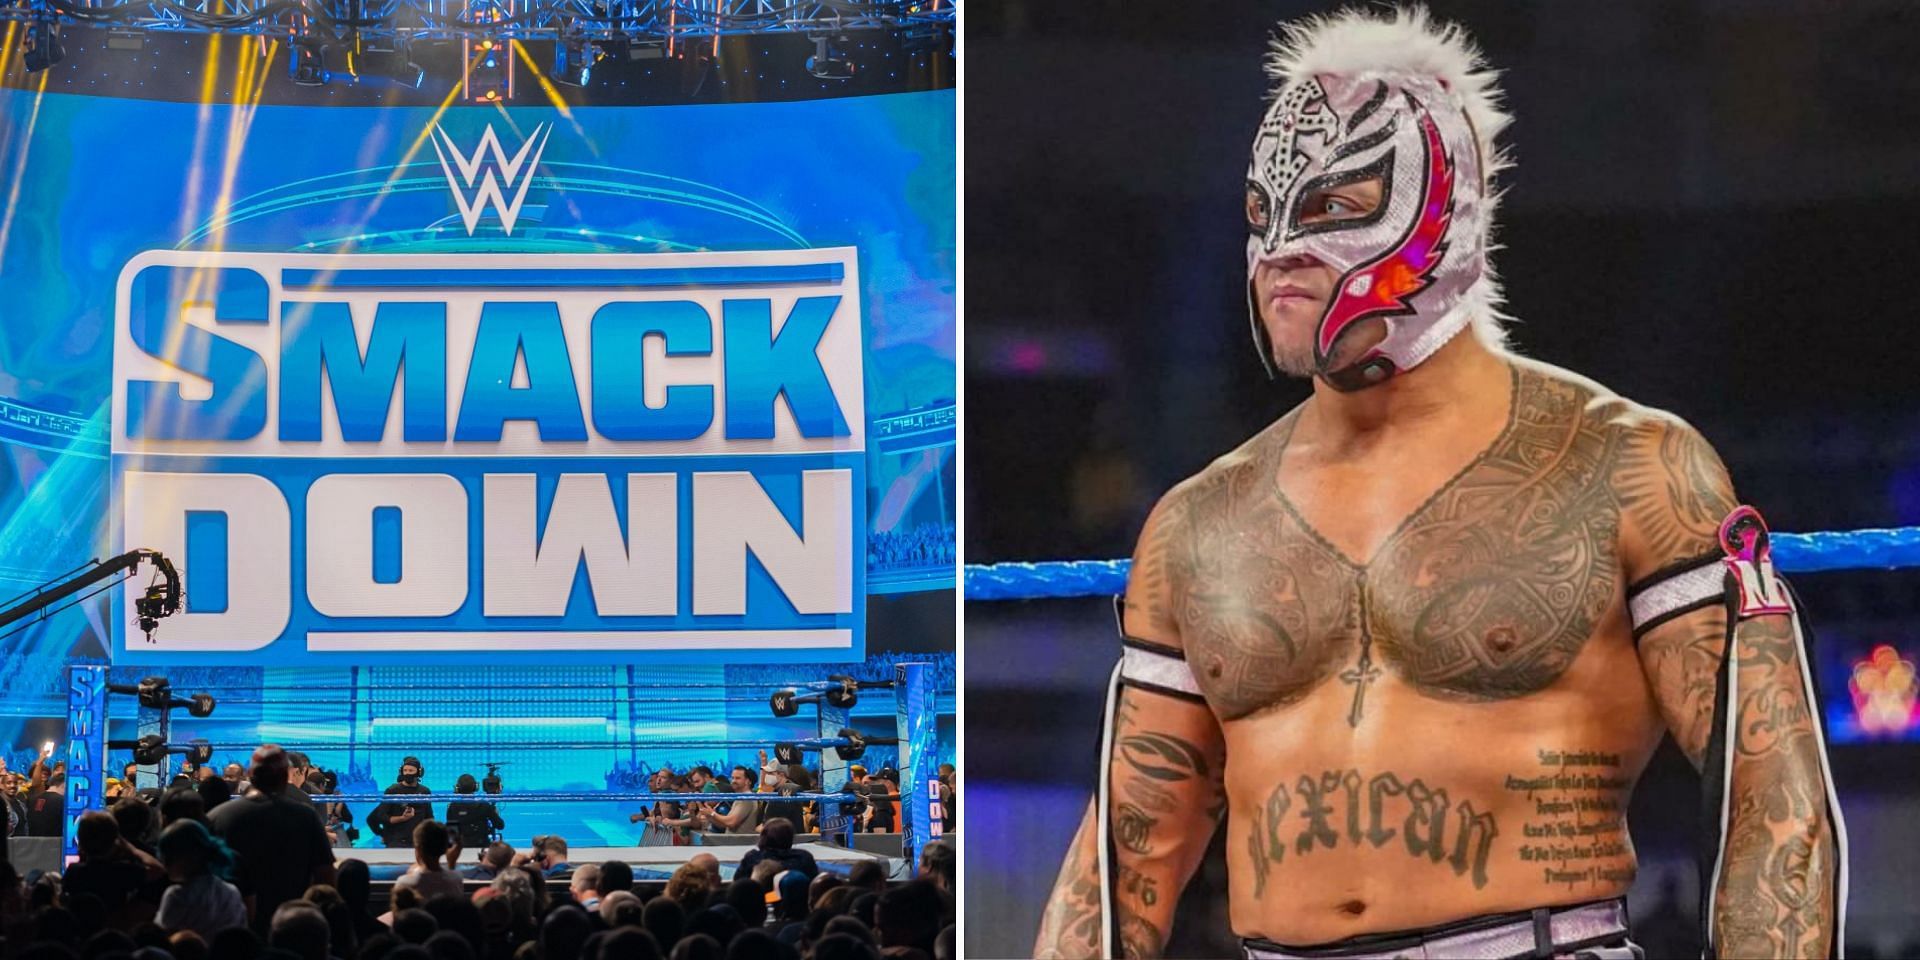 Rey Mysterio collided with a former WWE Champion